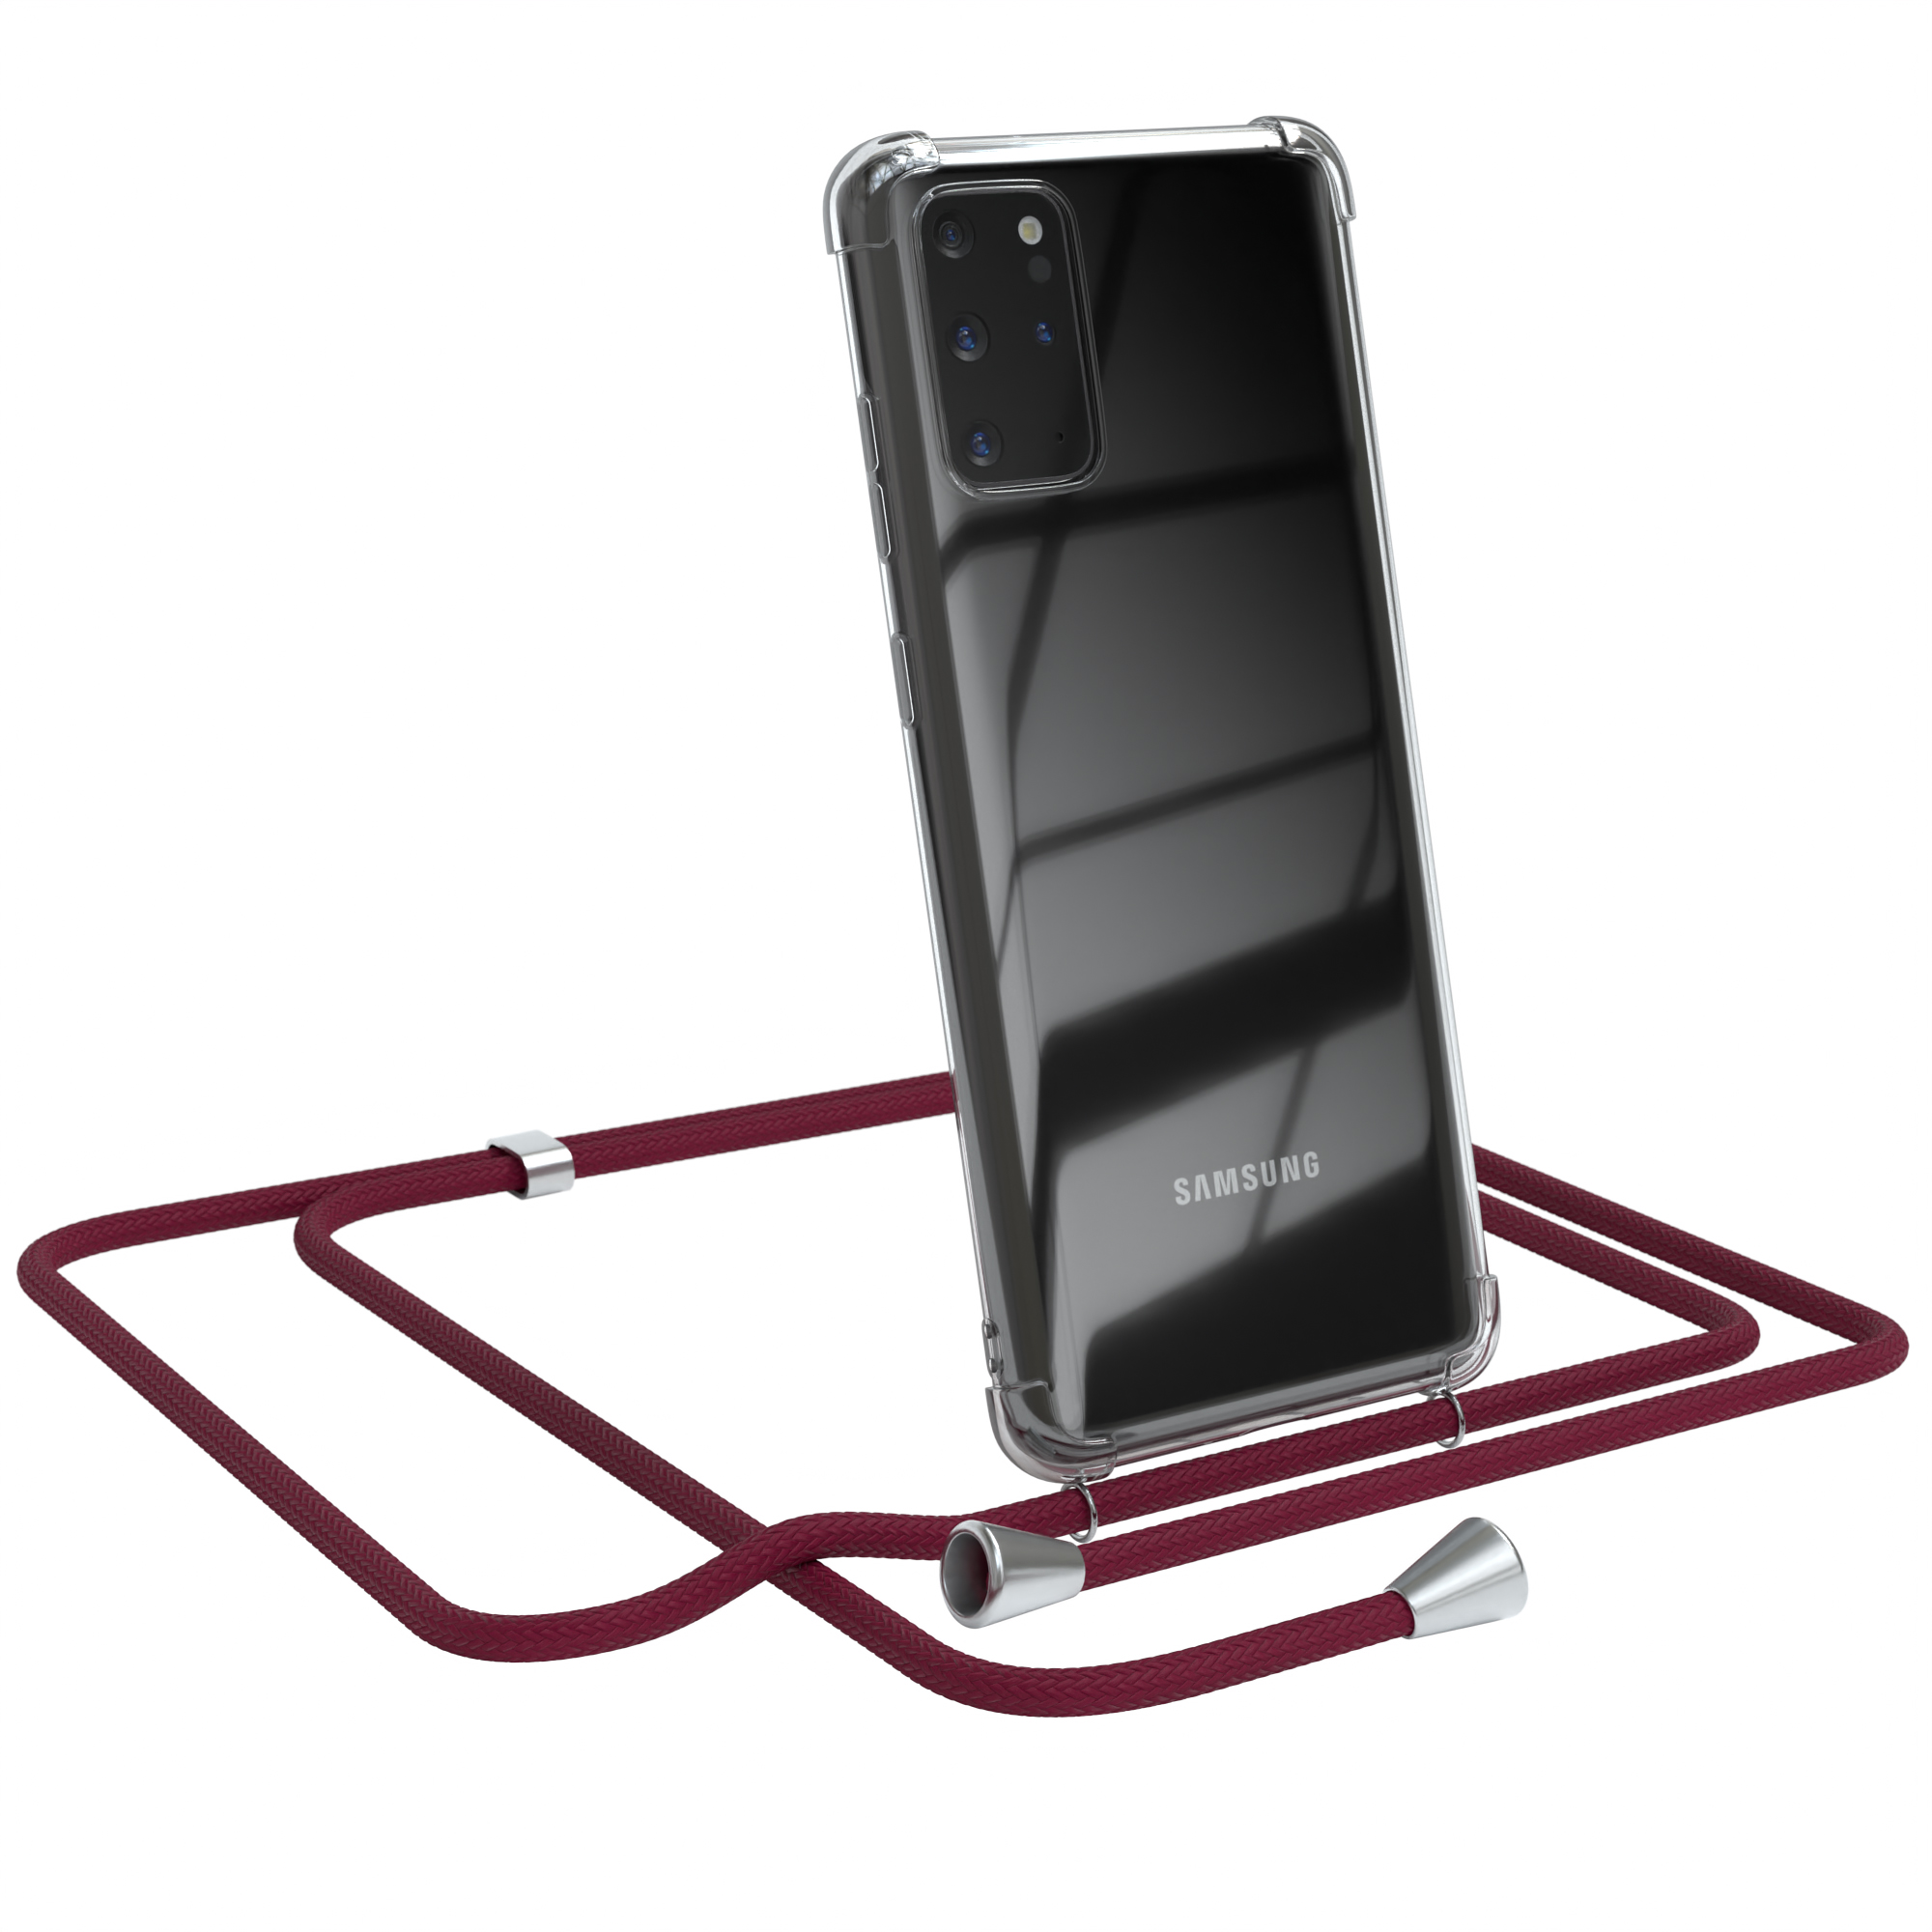 Cover 5G, Plus Silber Plus S20 Rot Clear EAZY Bordeaux / Umhängetasche, mit Umhängeband, S20 Galaxy CASE / Clips Samsung,